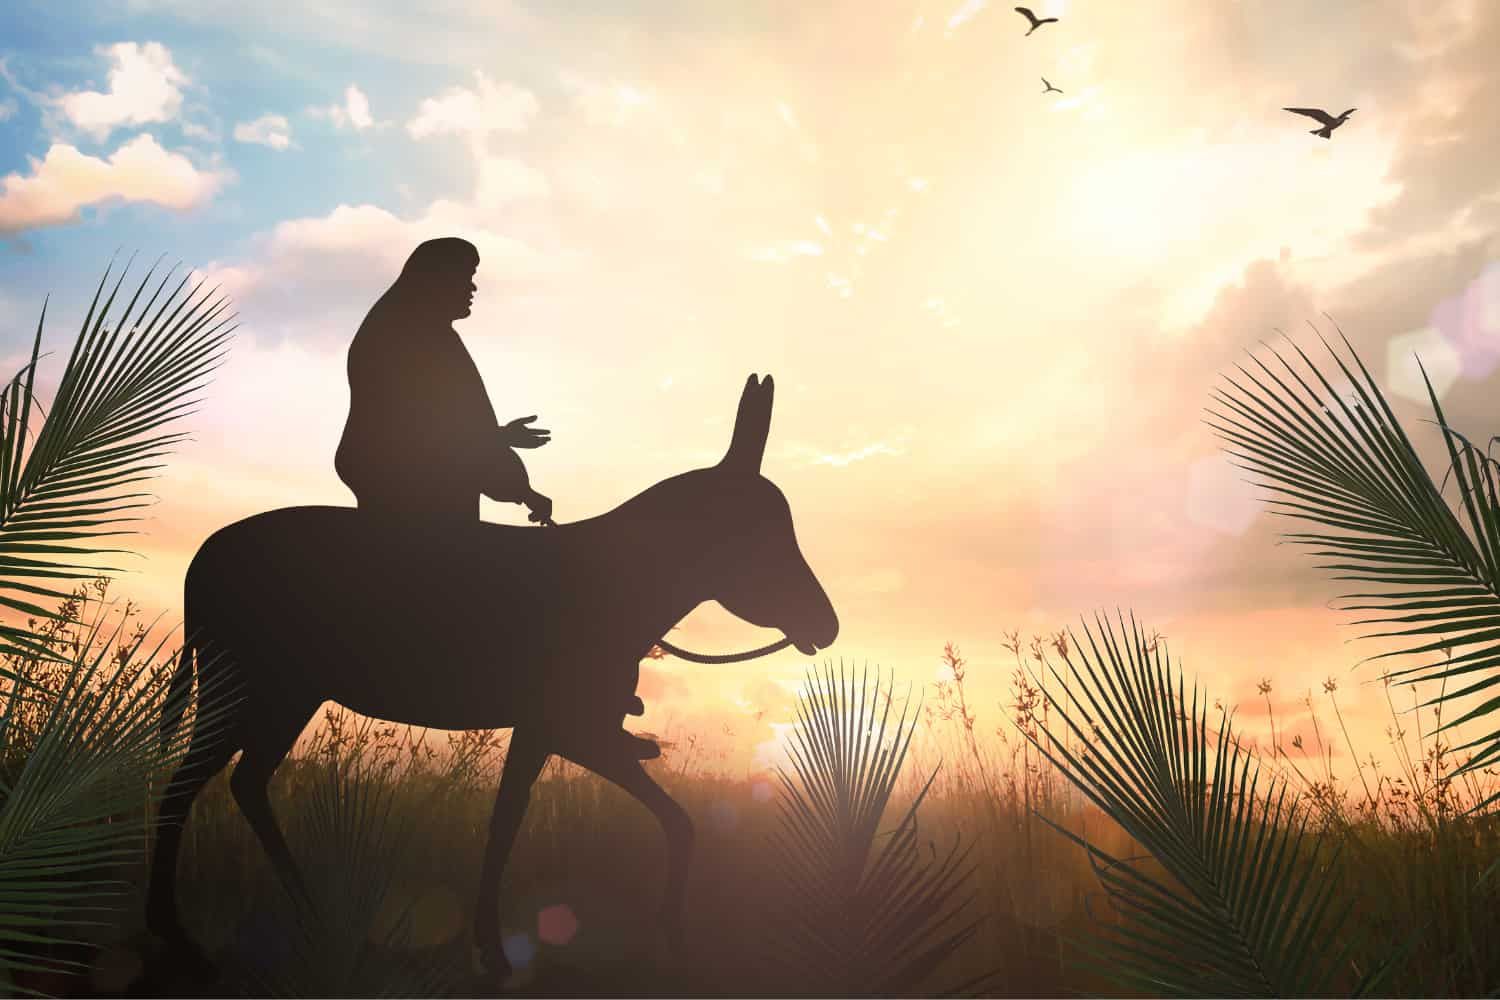 Lesson%20-%20NT%20Easter%2002%20-%20Palm%20Sunday%202%20Humble%20on%20a%20donkey-c3dfbb64 Easter: Holy Week